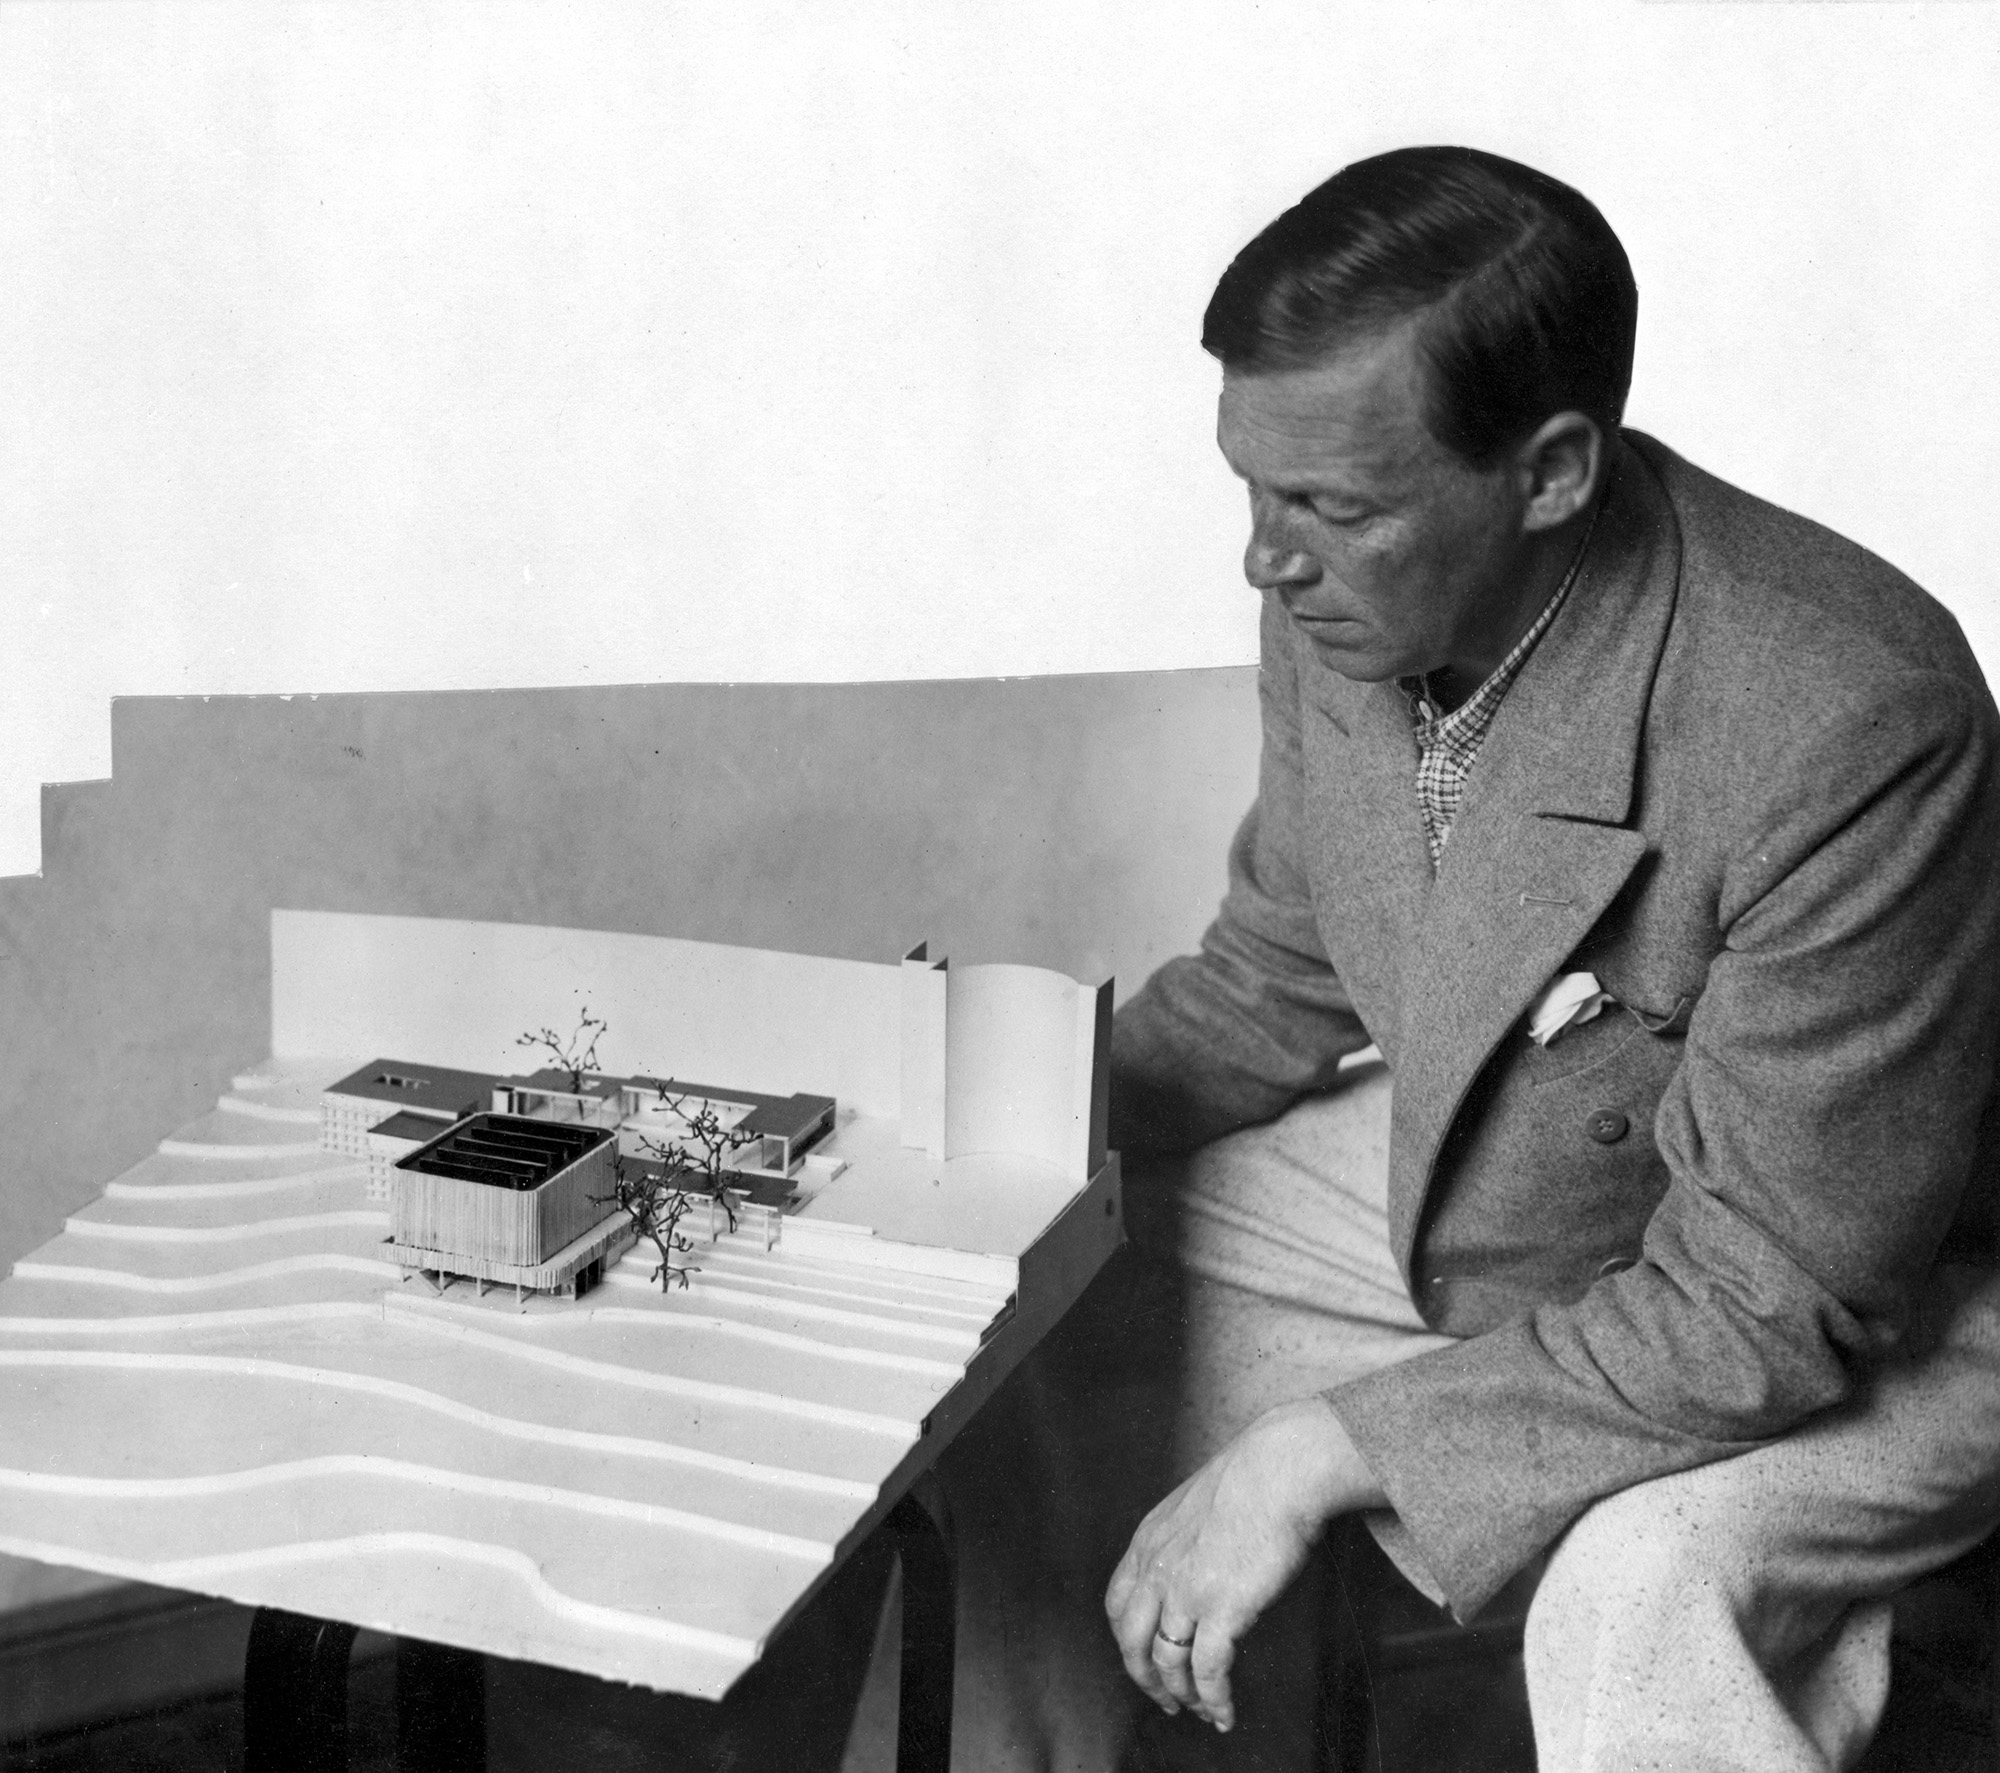 Alvar Aalto and a scale model of the Finnish pavilion at the World Exposition in Paris 1937. Photo © Alvar Aalto Foundation